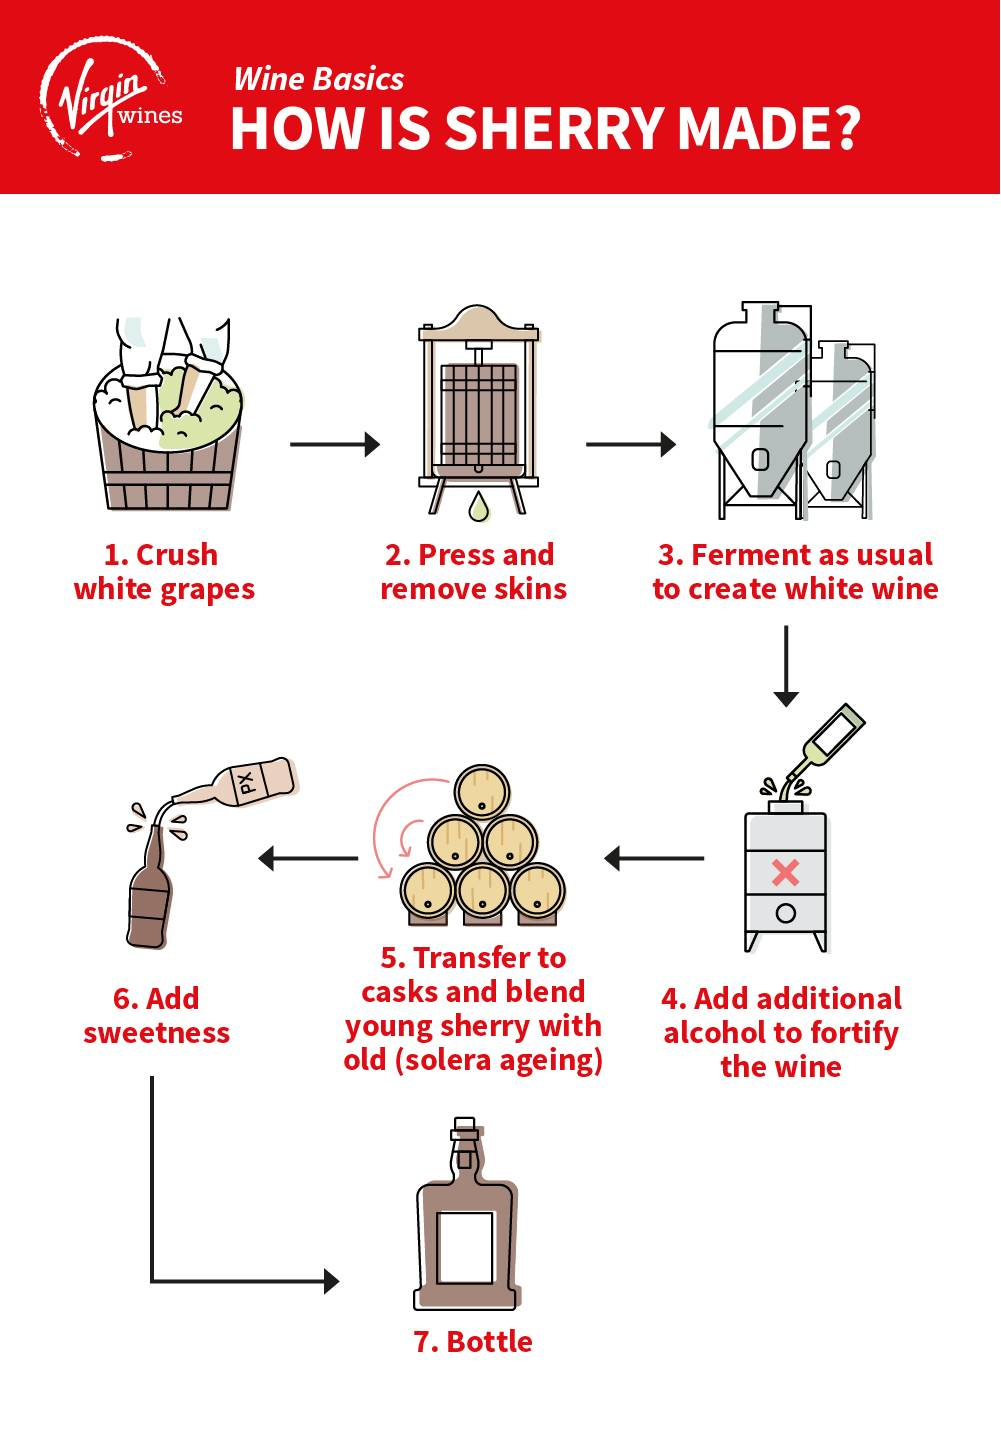 Infographic by Virgin Wines showing how Sherry is made